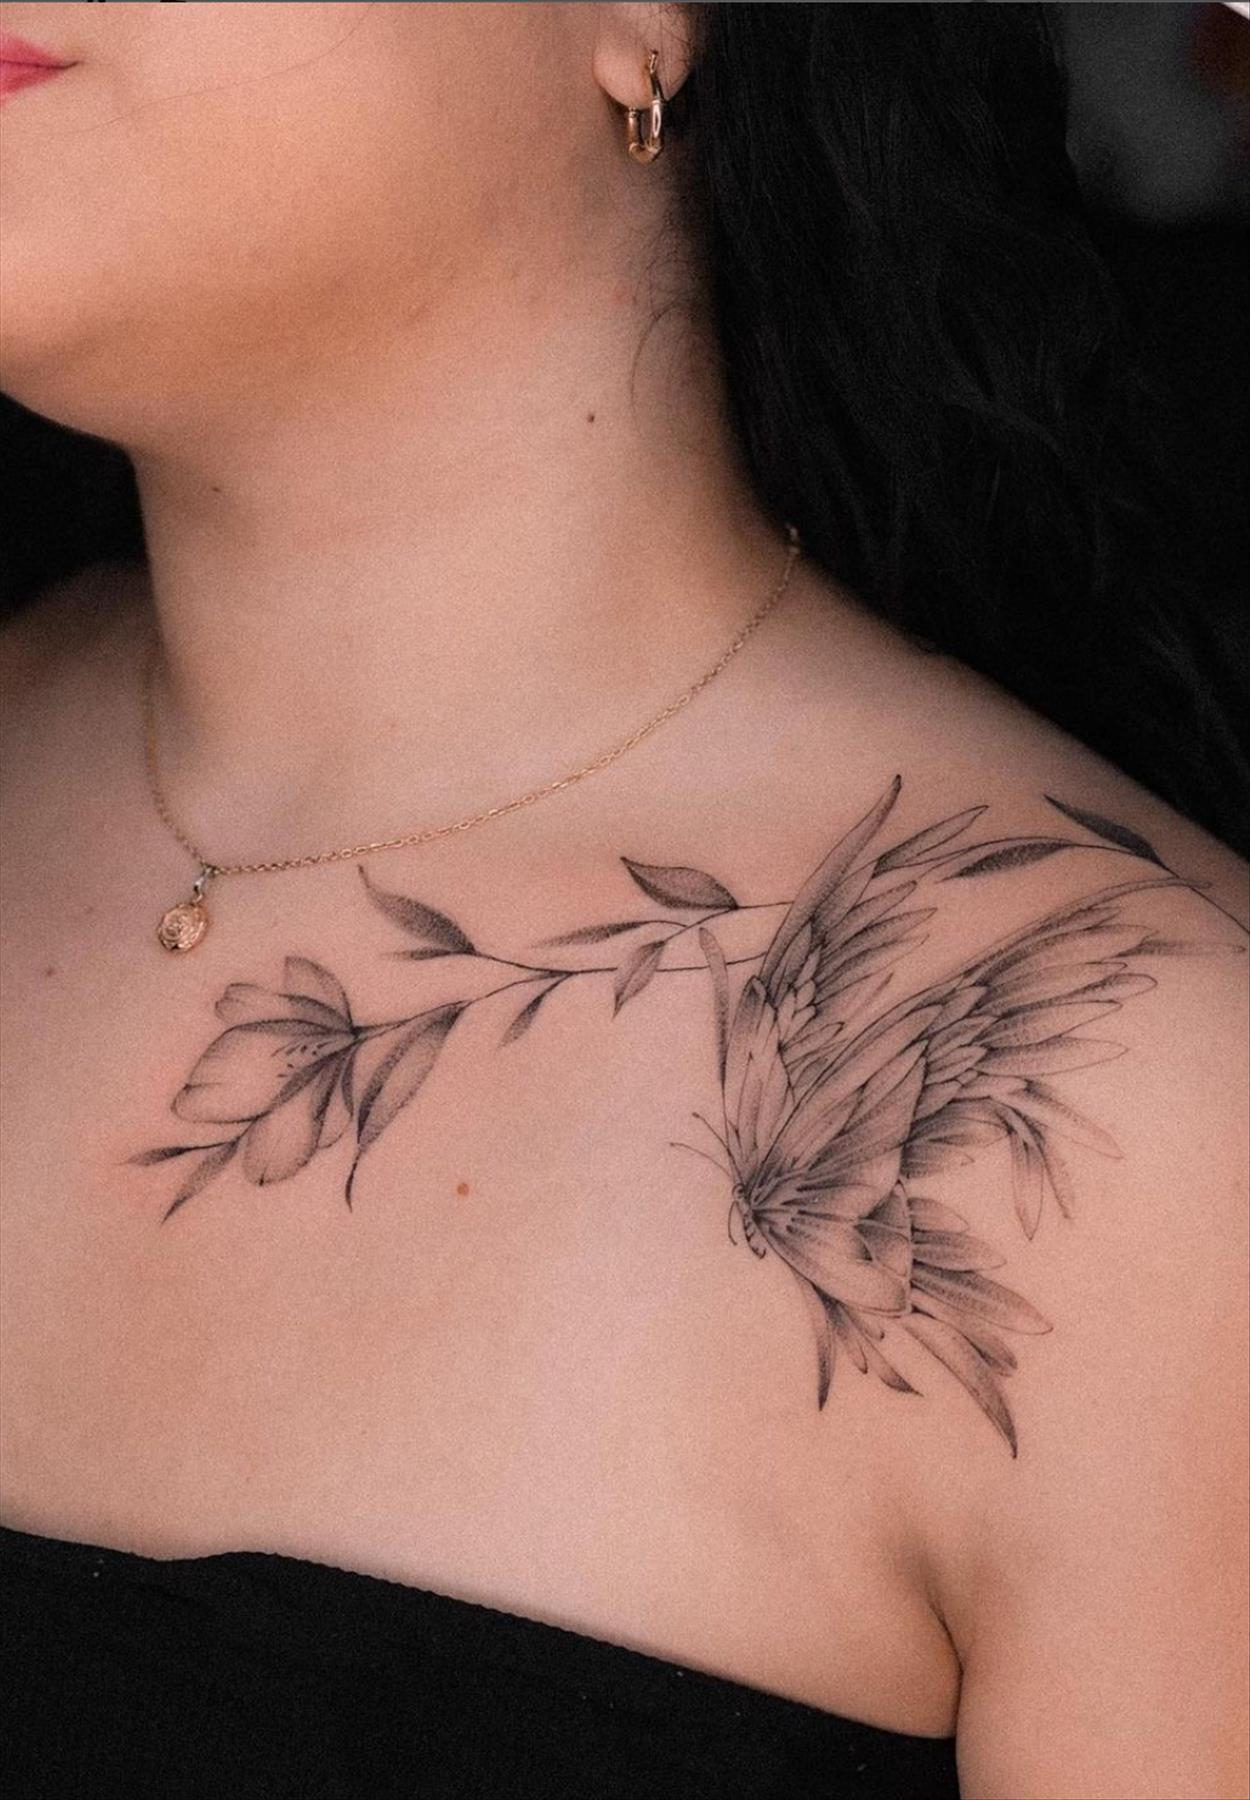 Stunning shoulder tattoos for women 2022 for a chic look